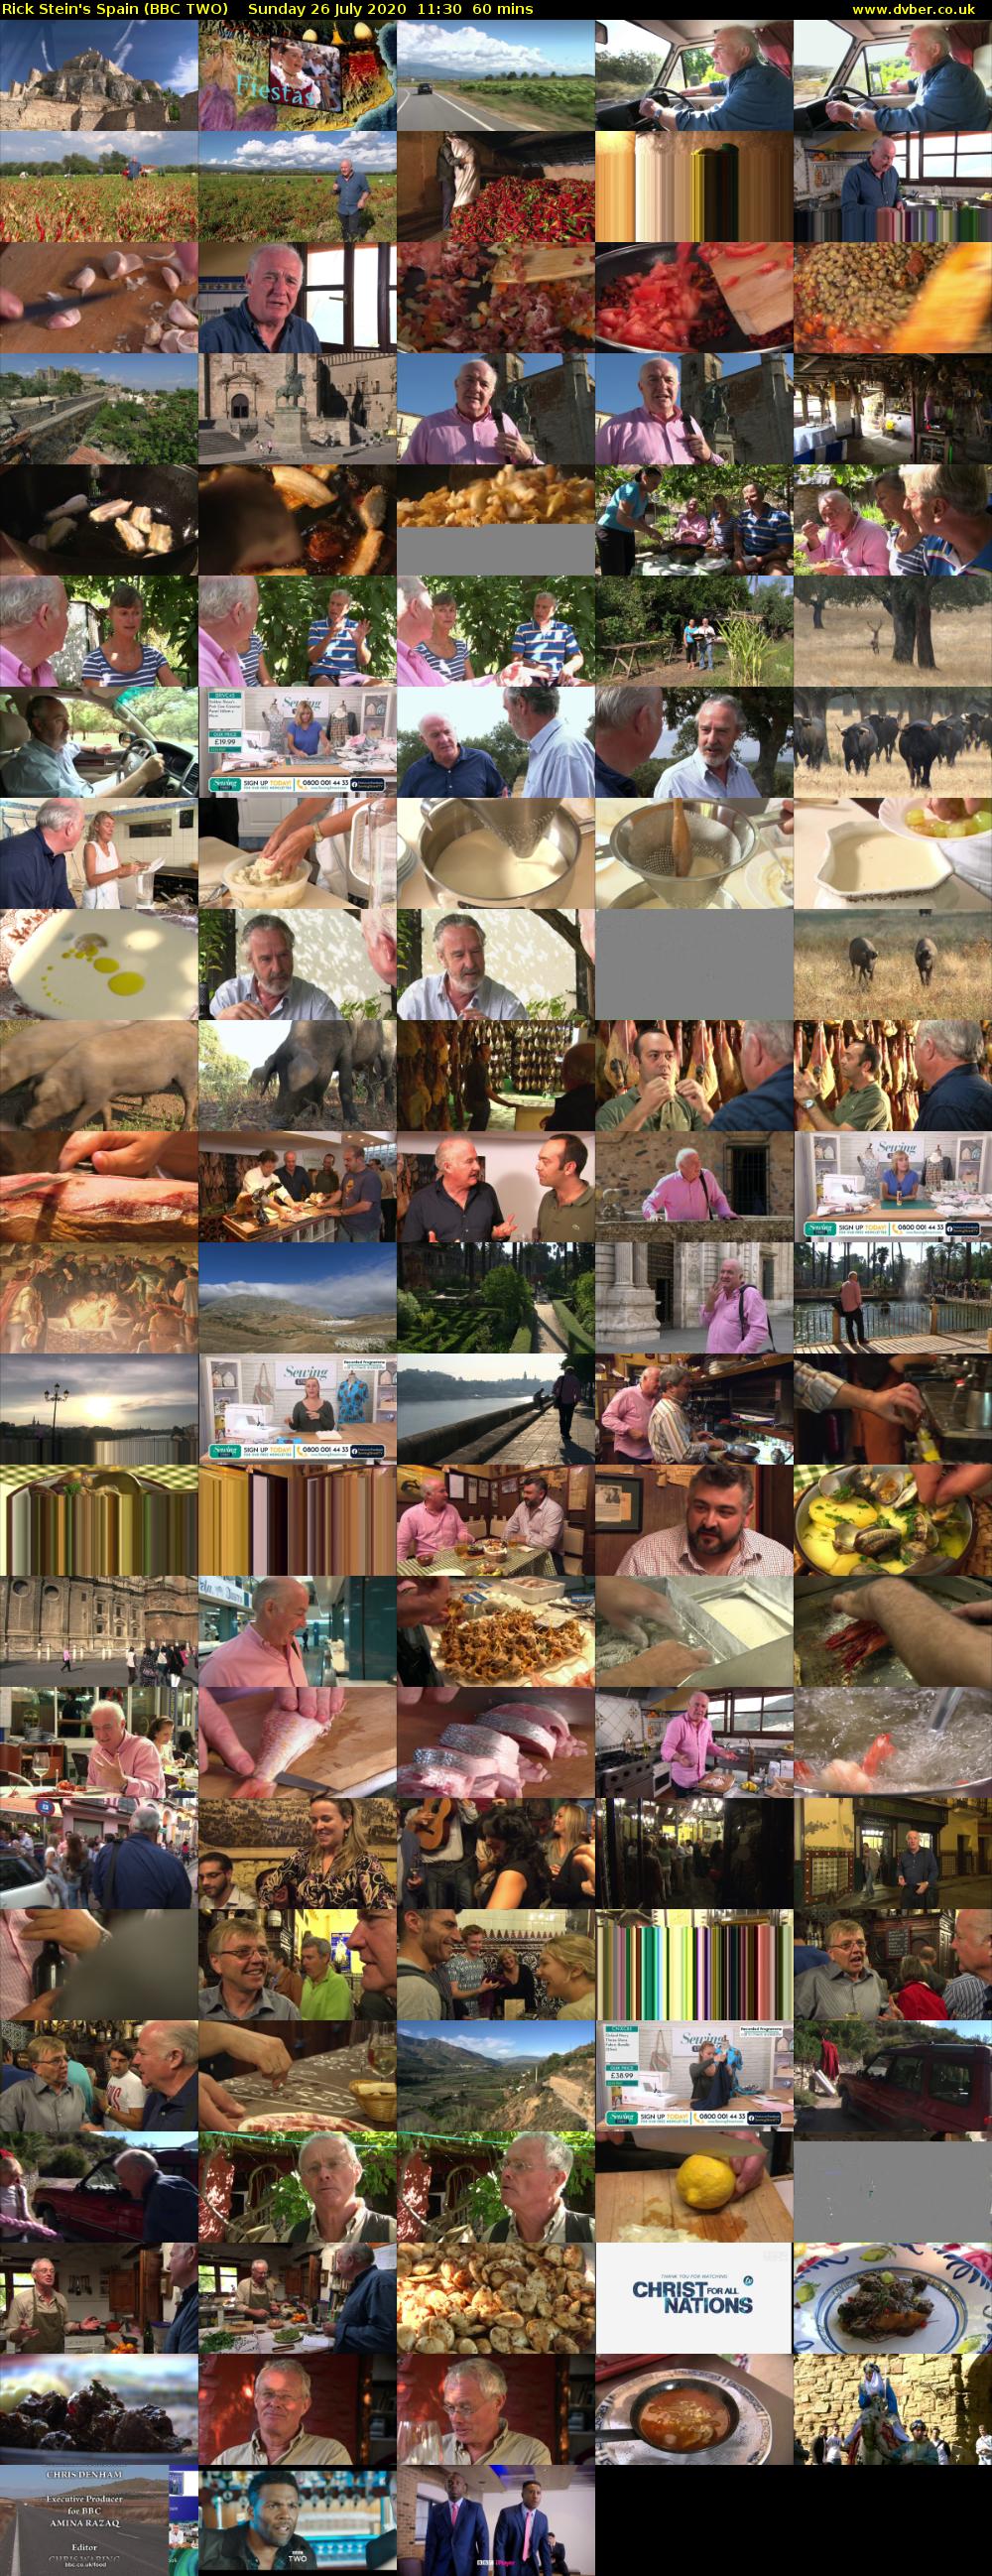 Rick Stein's Spain (BBC TWO) Sunday 26 July 2020 11:30 - 12:30